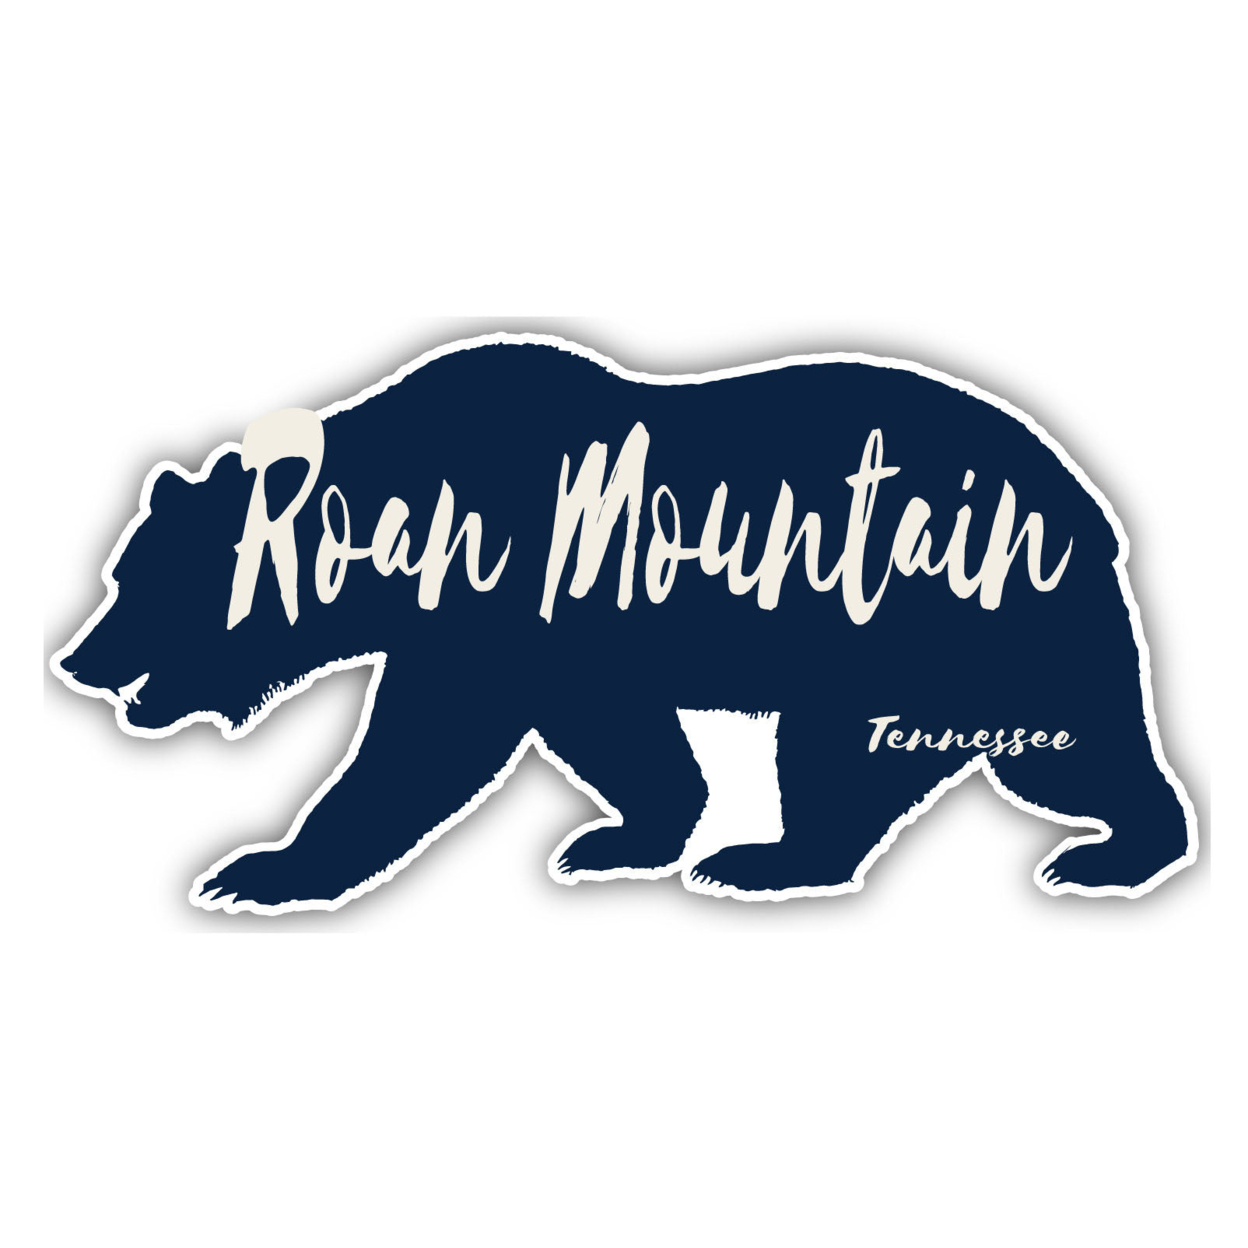 Roan Mountain Tennessee Souvenir Decorative Stickers (Choose Theme And Size) - Single Unit, 2-Inch, Camp Life